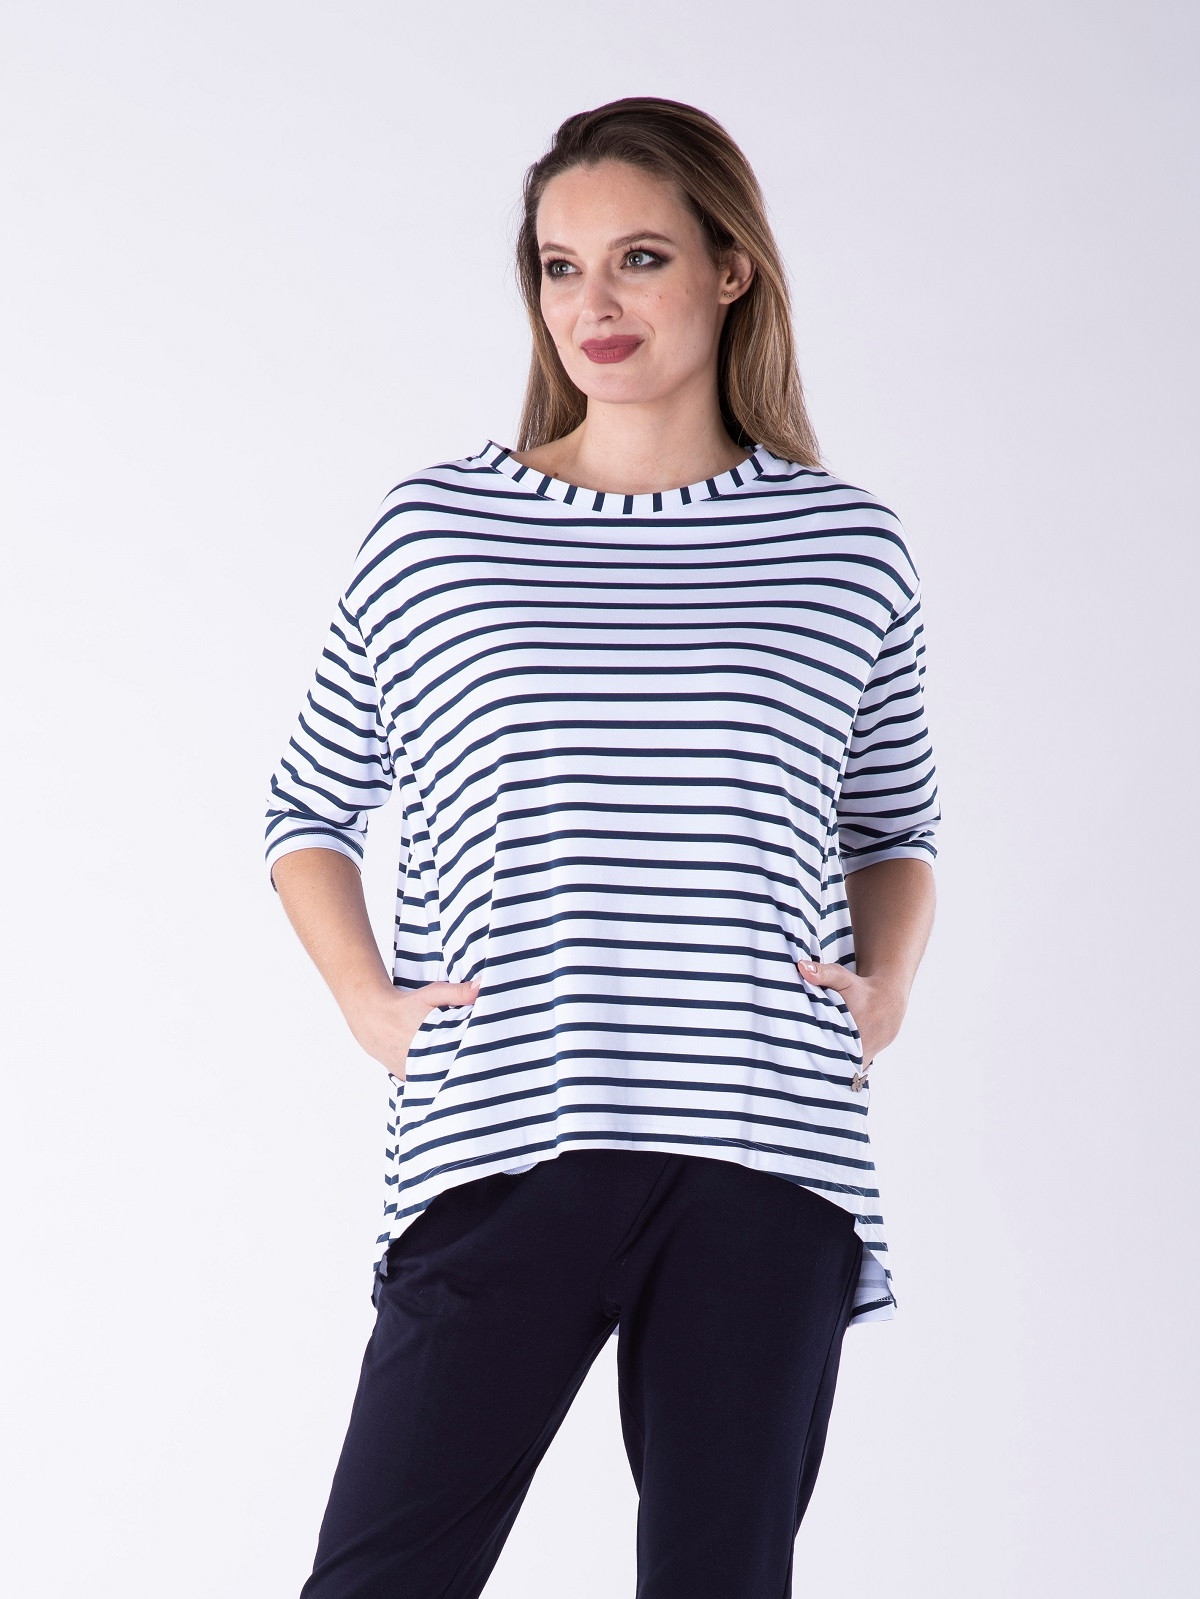 Look Made With Love Blouse 32 Portofino Navy Blue/White S / M